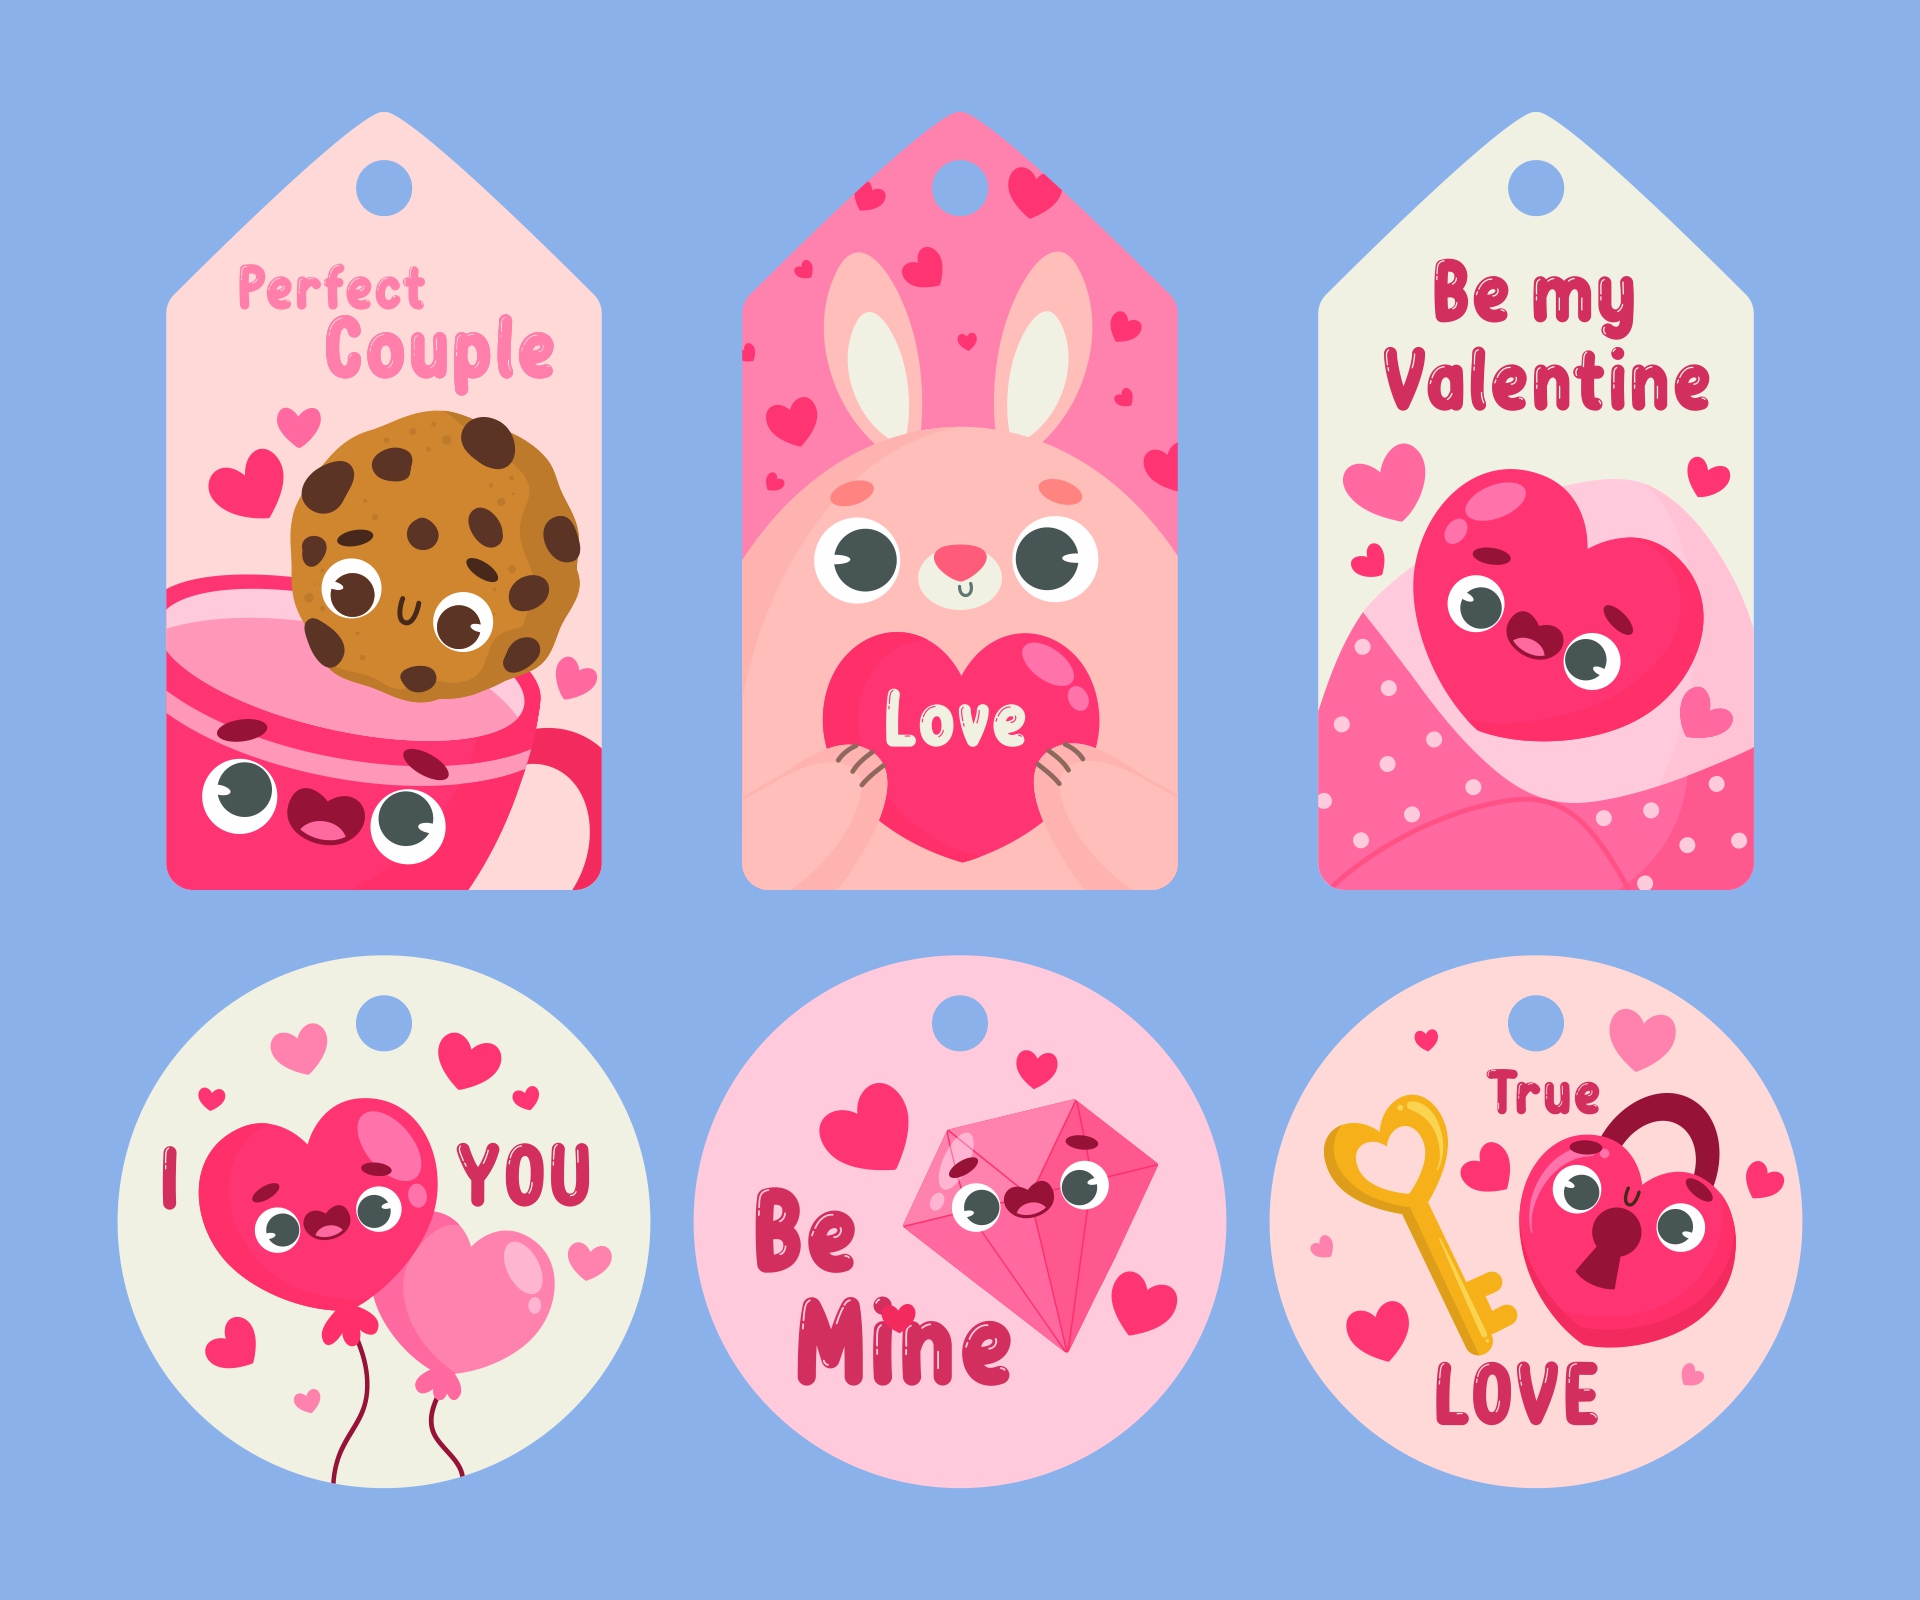 6 Best Images of Free Valentine Printable Gift Tags Free Printable